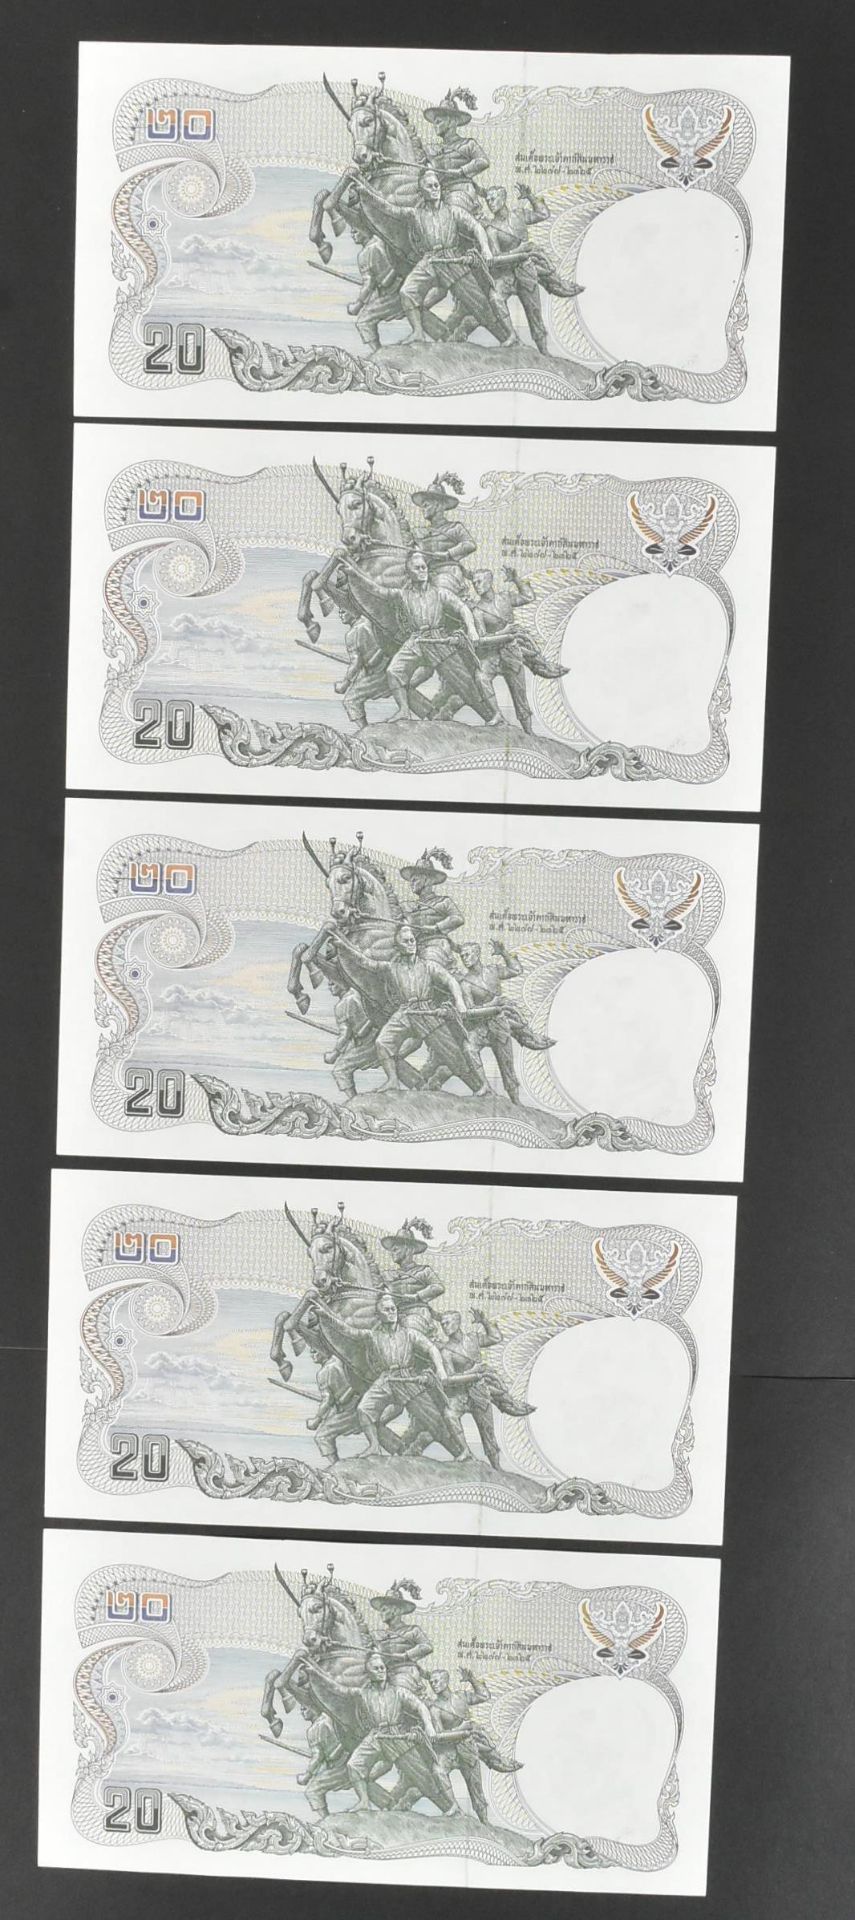 COLLECTION OF INTERNATIONAL UNCIRCULATED BANK NOTES - Image 10 of 36